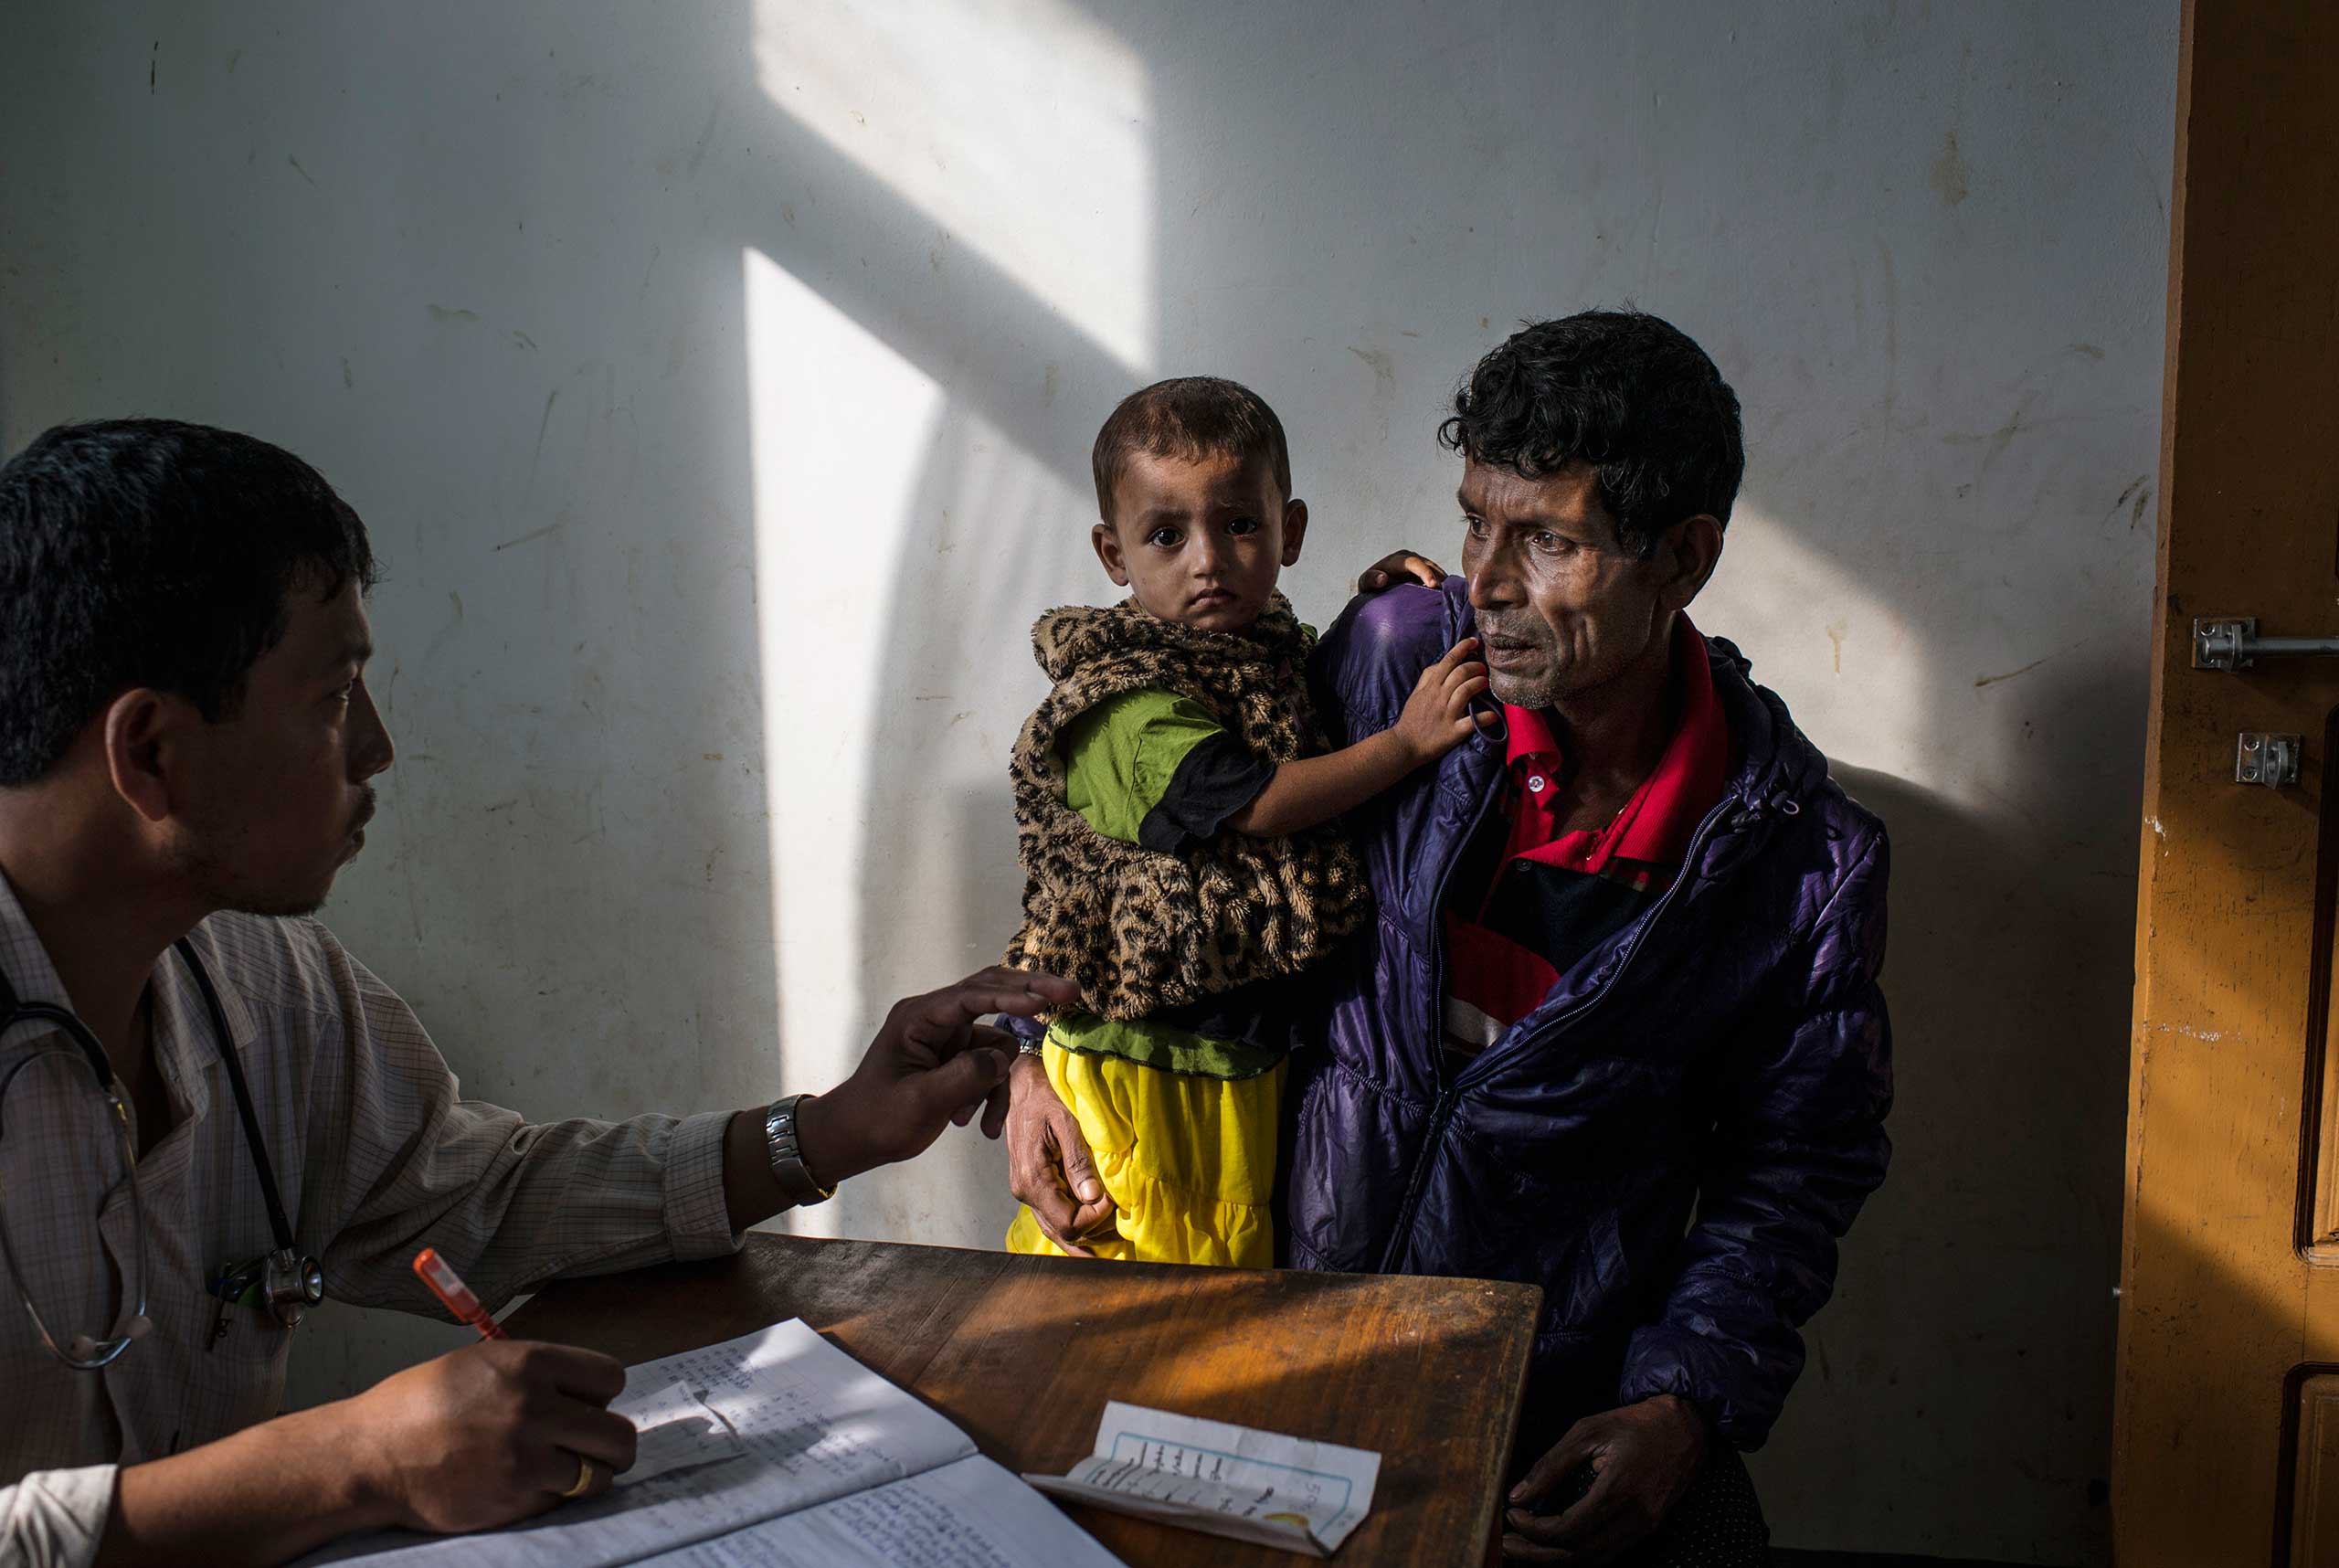 A government doctor looks over the sick child of a Rohingya man in the That Kay Pin Emergency Hospital in the camp for Internally Displaced Rohingya outside of Sittwe, in Myanmar, Nov. 25, 2015. The emergency hospital at That Kay Pin within the IDP camp has extremely limited resources, and doctors keep minimal hours to check and treat the ill or wounded.